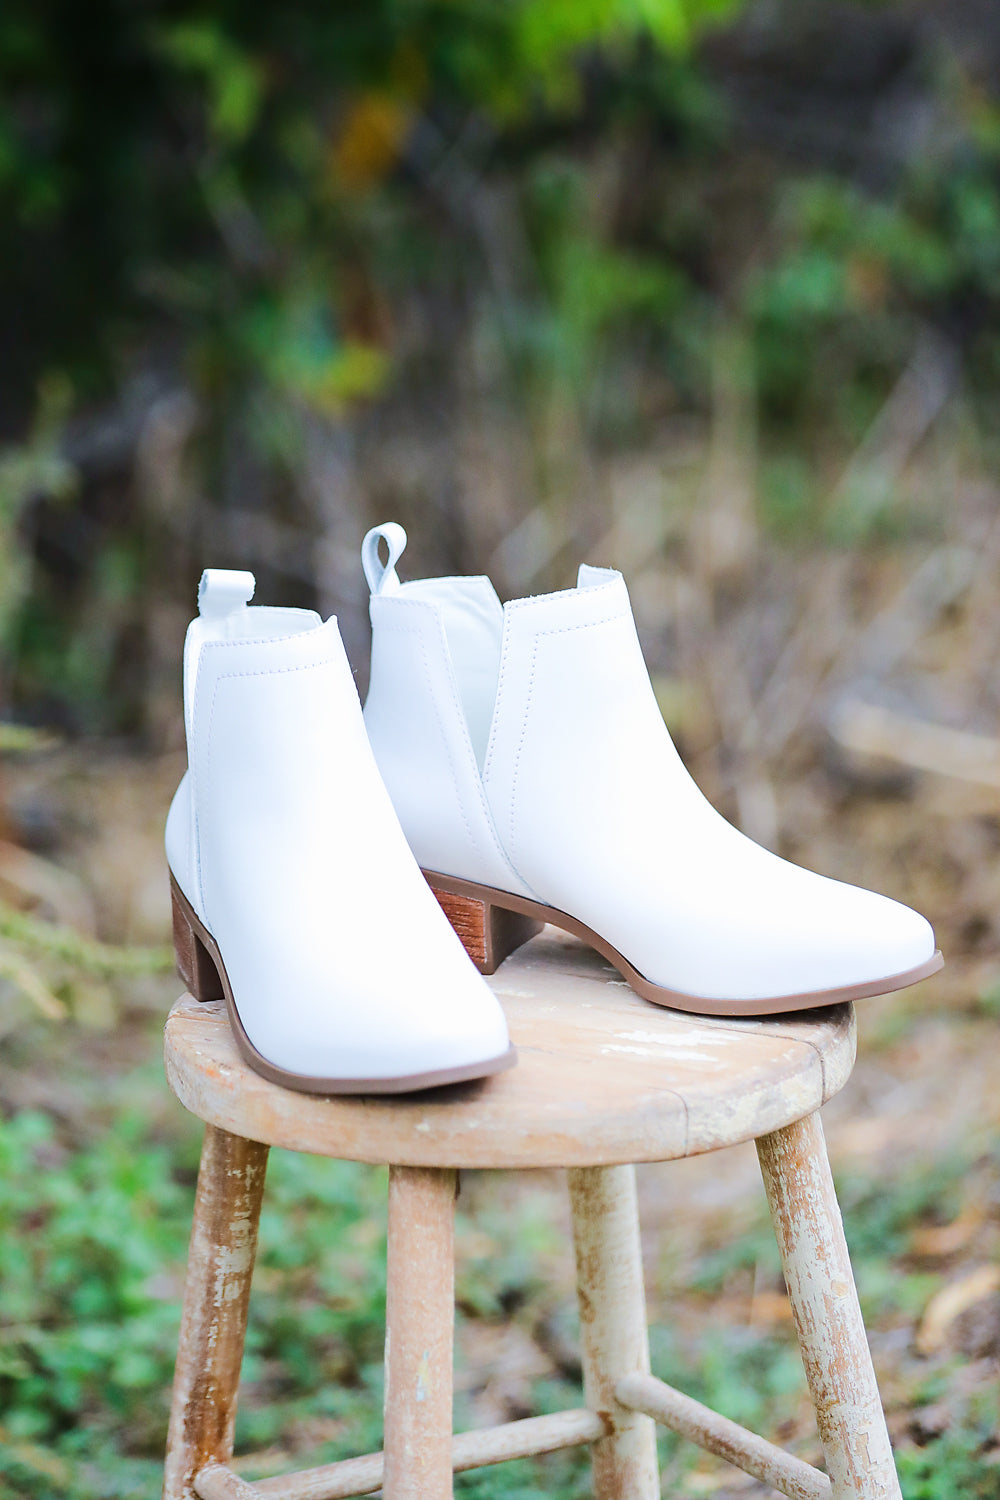 The Attic Boutique Caruso Leather Booties Shoes - The Attic Boutique